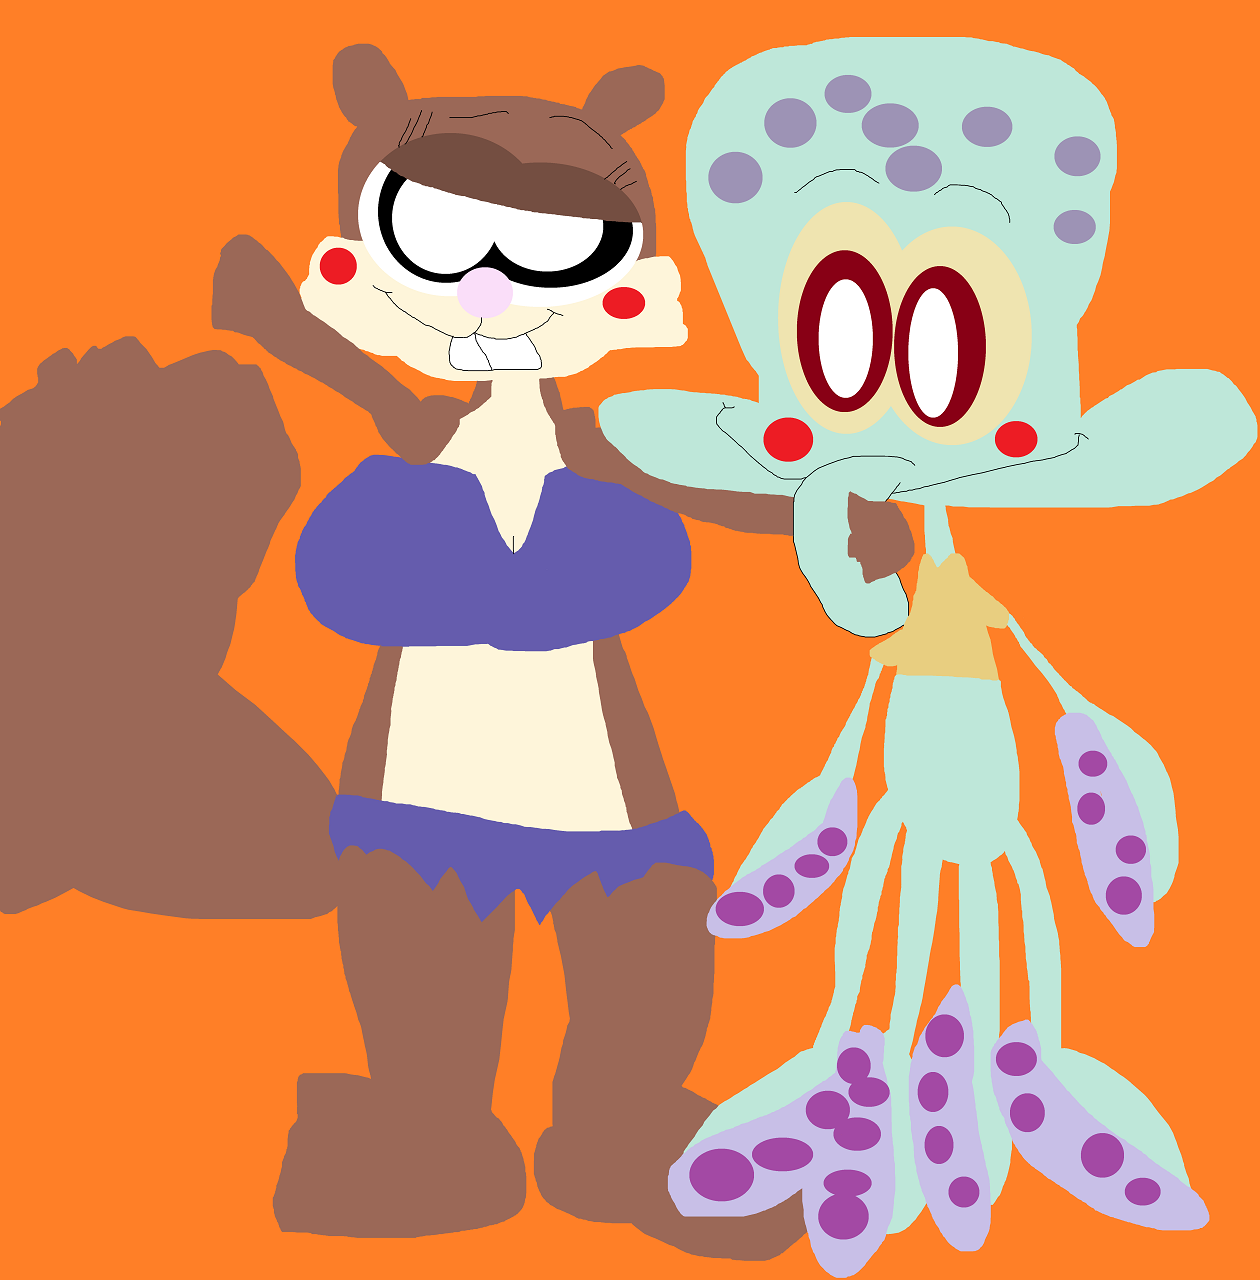 Just Sandy Going To Kiss Squidward by Falconlobo